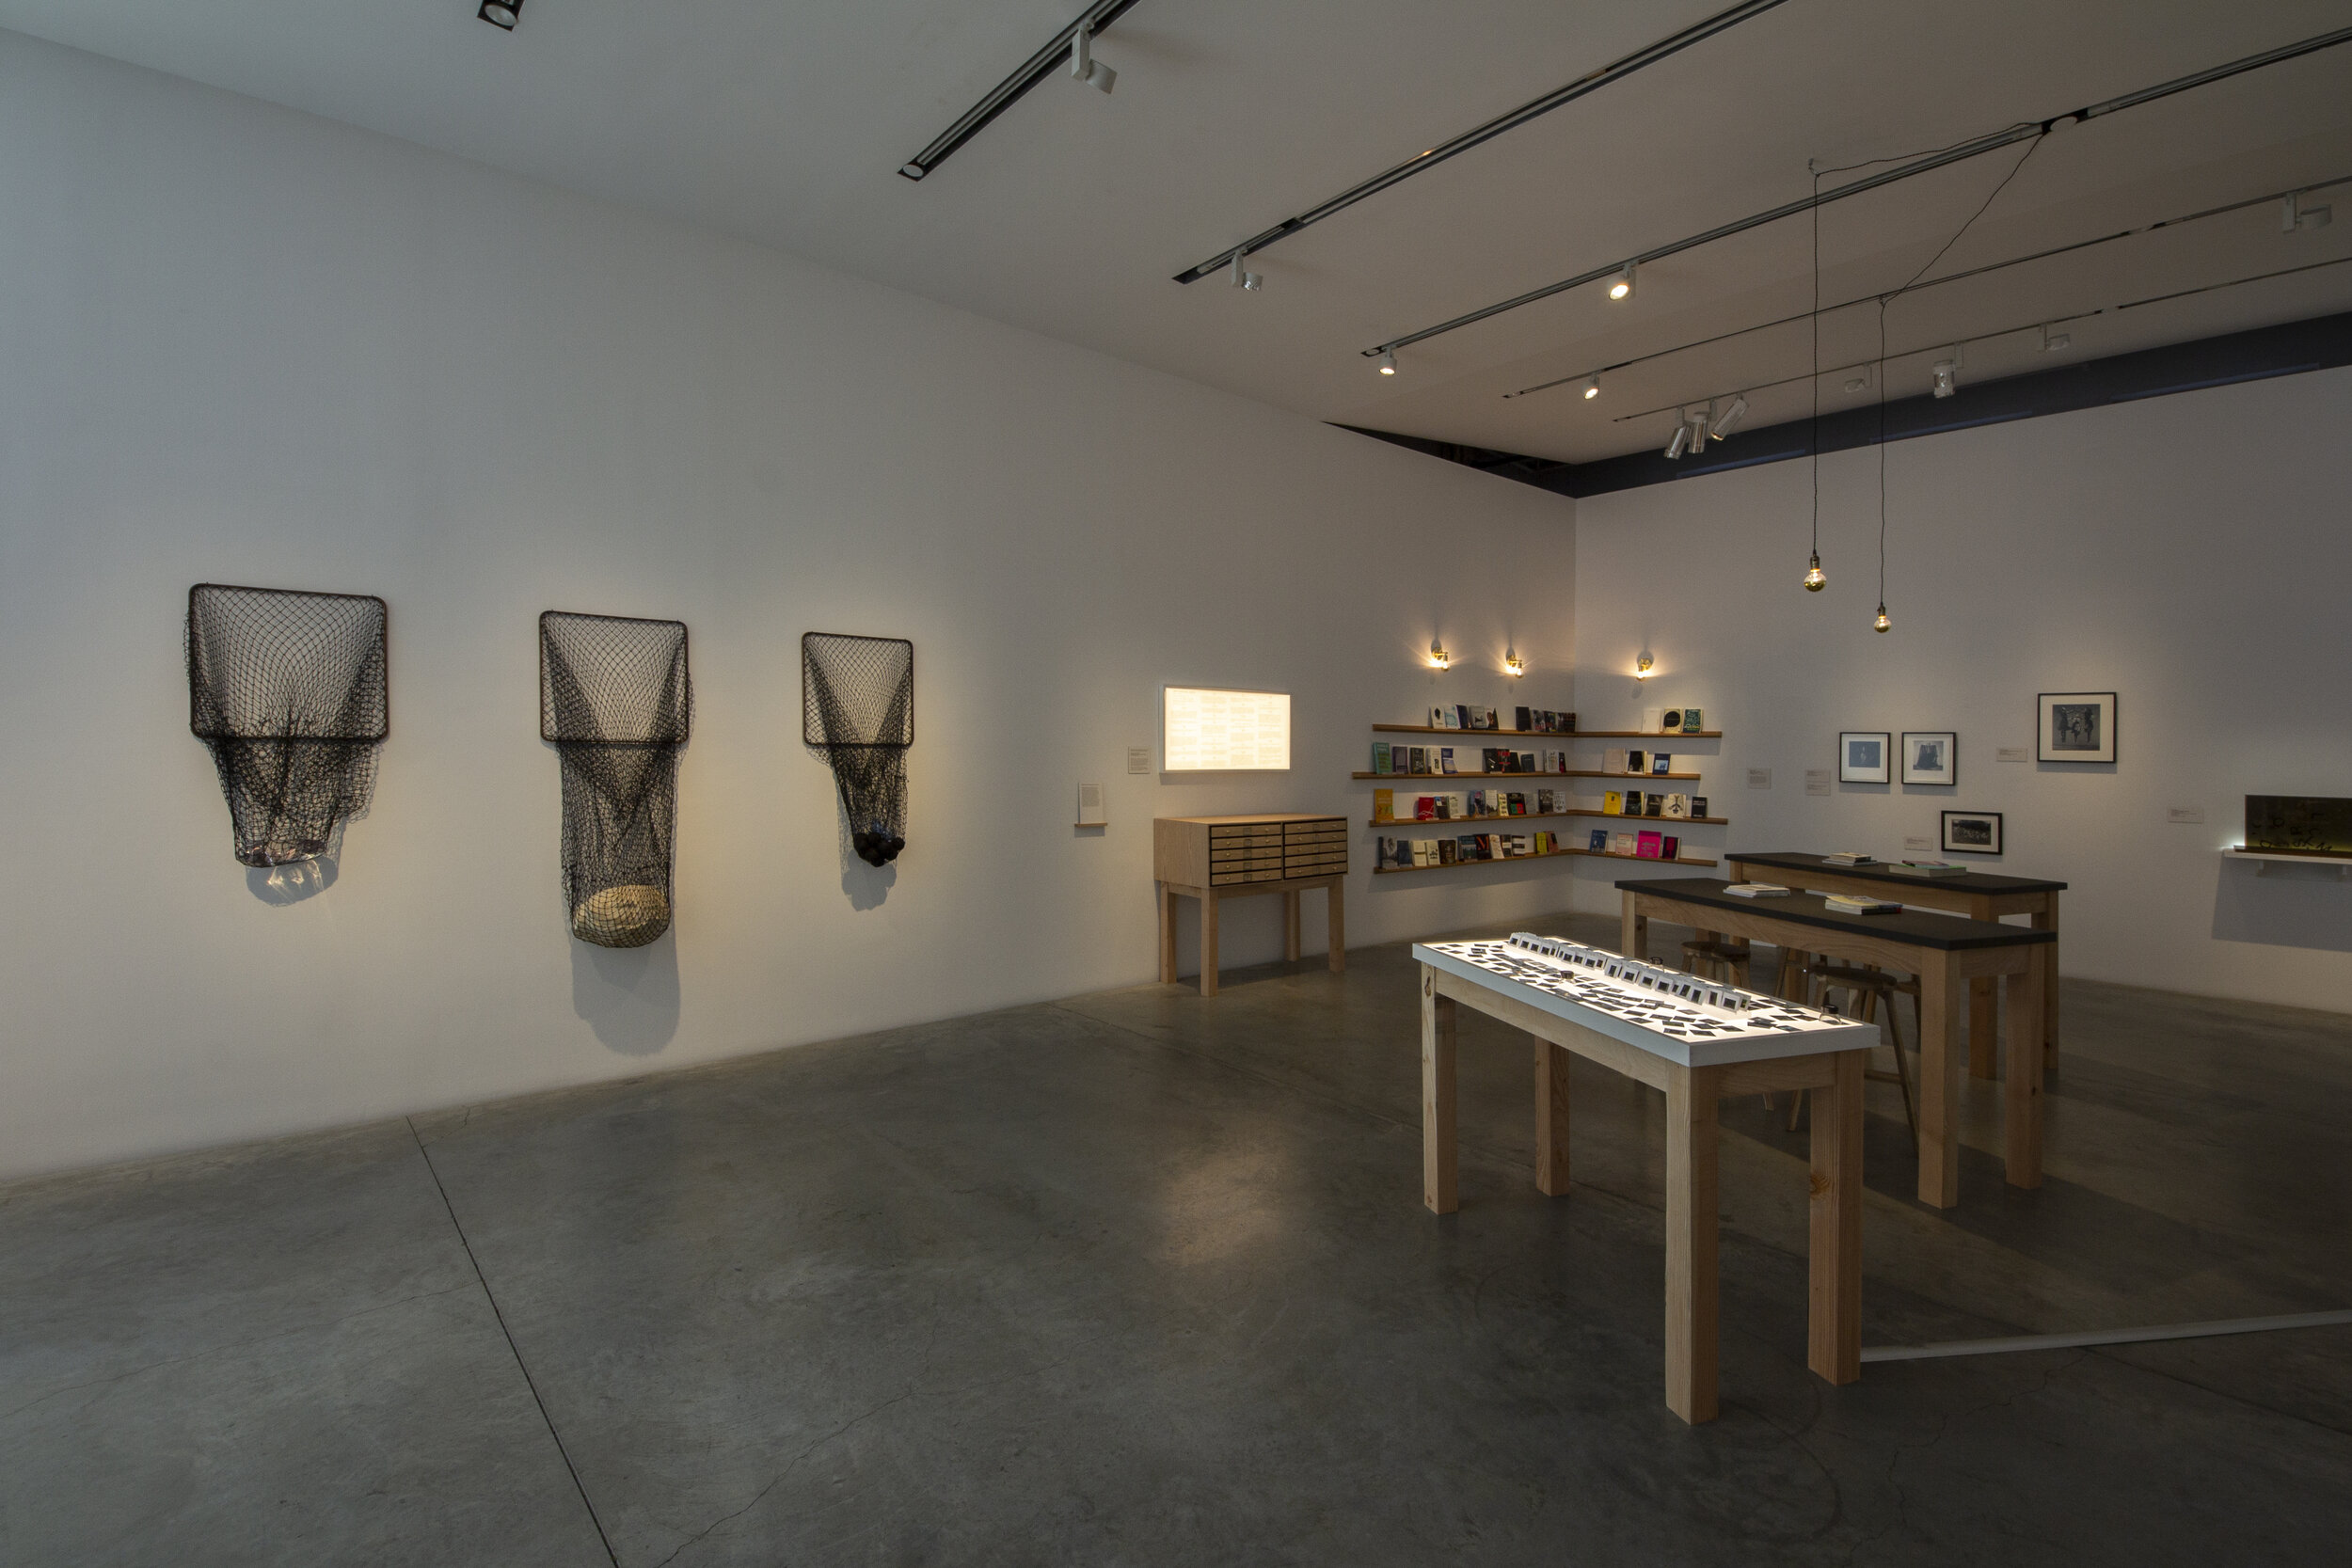 In the Historical Present installation view, photo by Daniel Chou 2.jpg